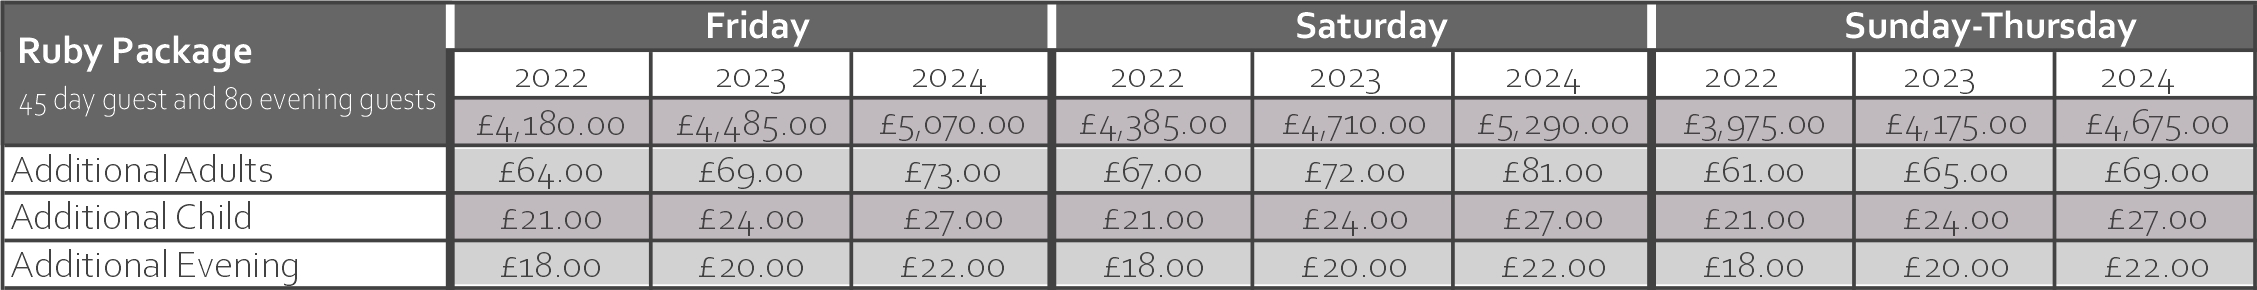 Ruby package prices The Old Rectory Handsworth